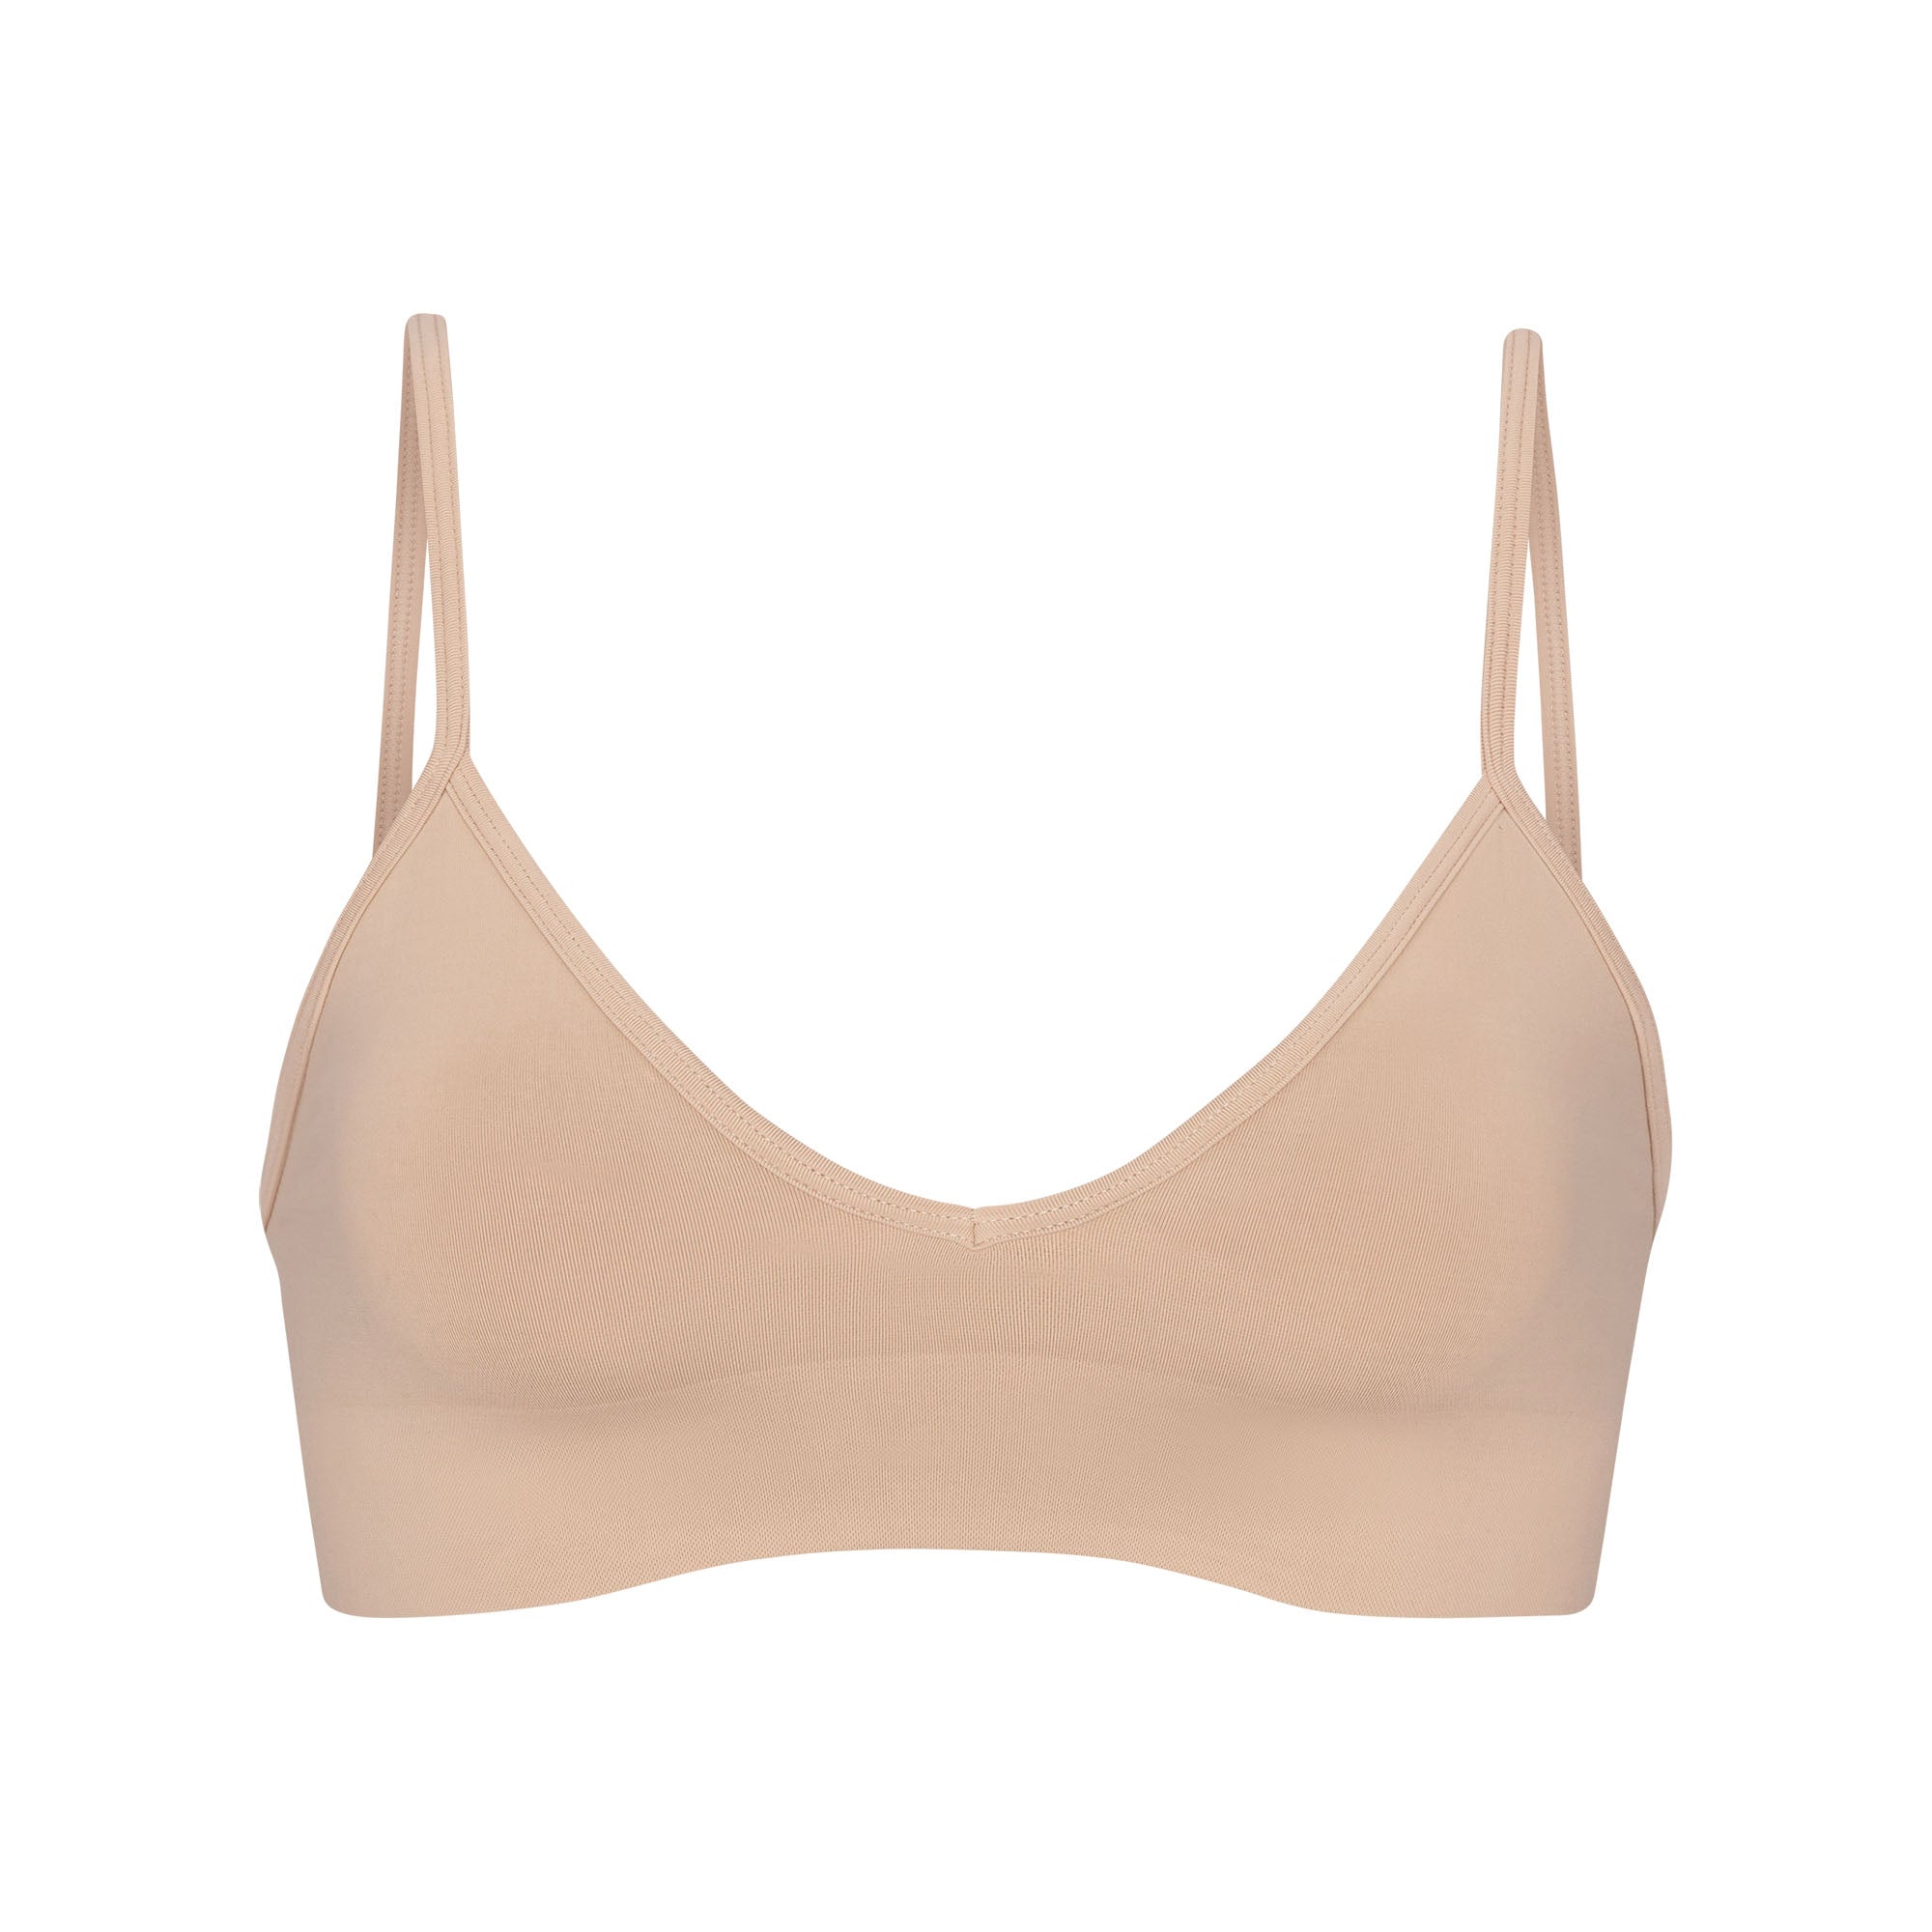 SOFT SMOOTHING SEAMLESS BRALETTE | CLAY - SOFT SMOOTHING SEAMLESS ...